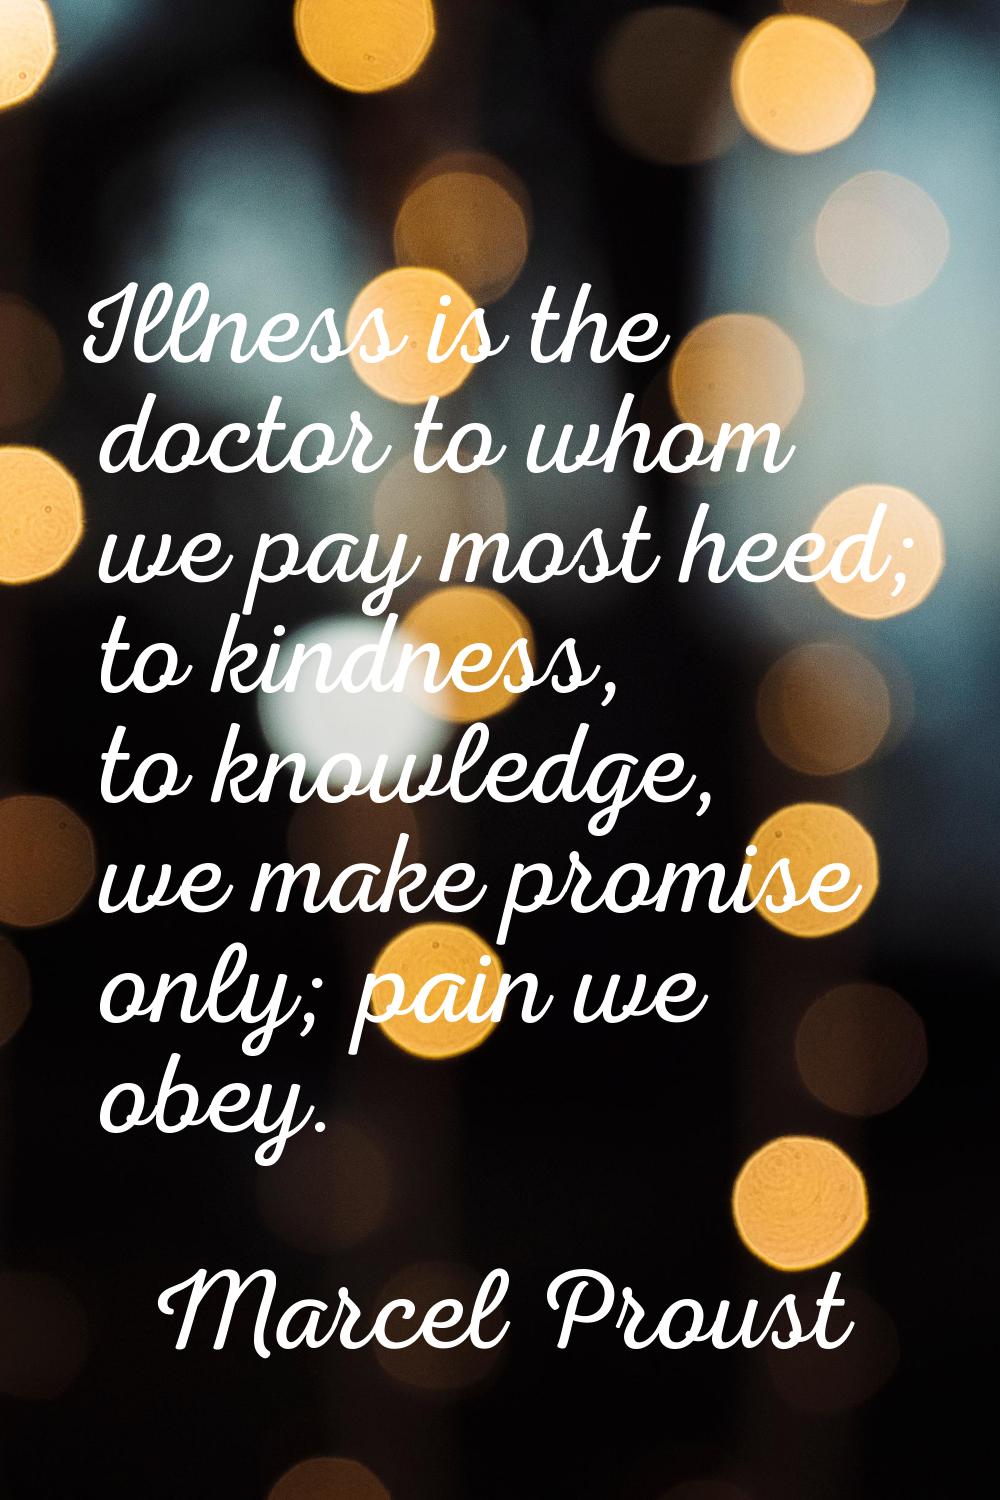 Illness is the doctor to whom we pay most heed; to kindness, to knowledge, we make promise only; pa